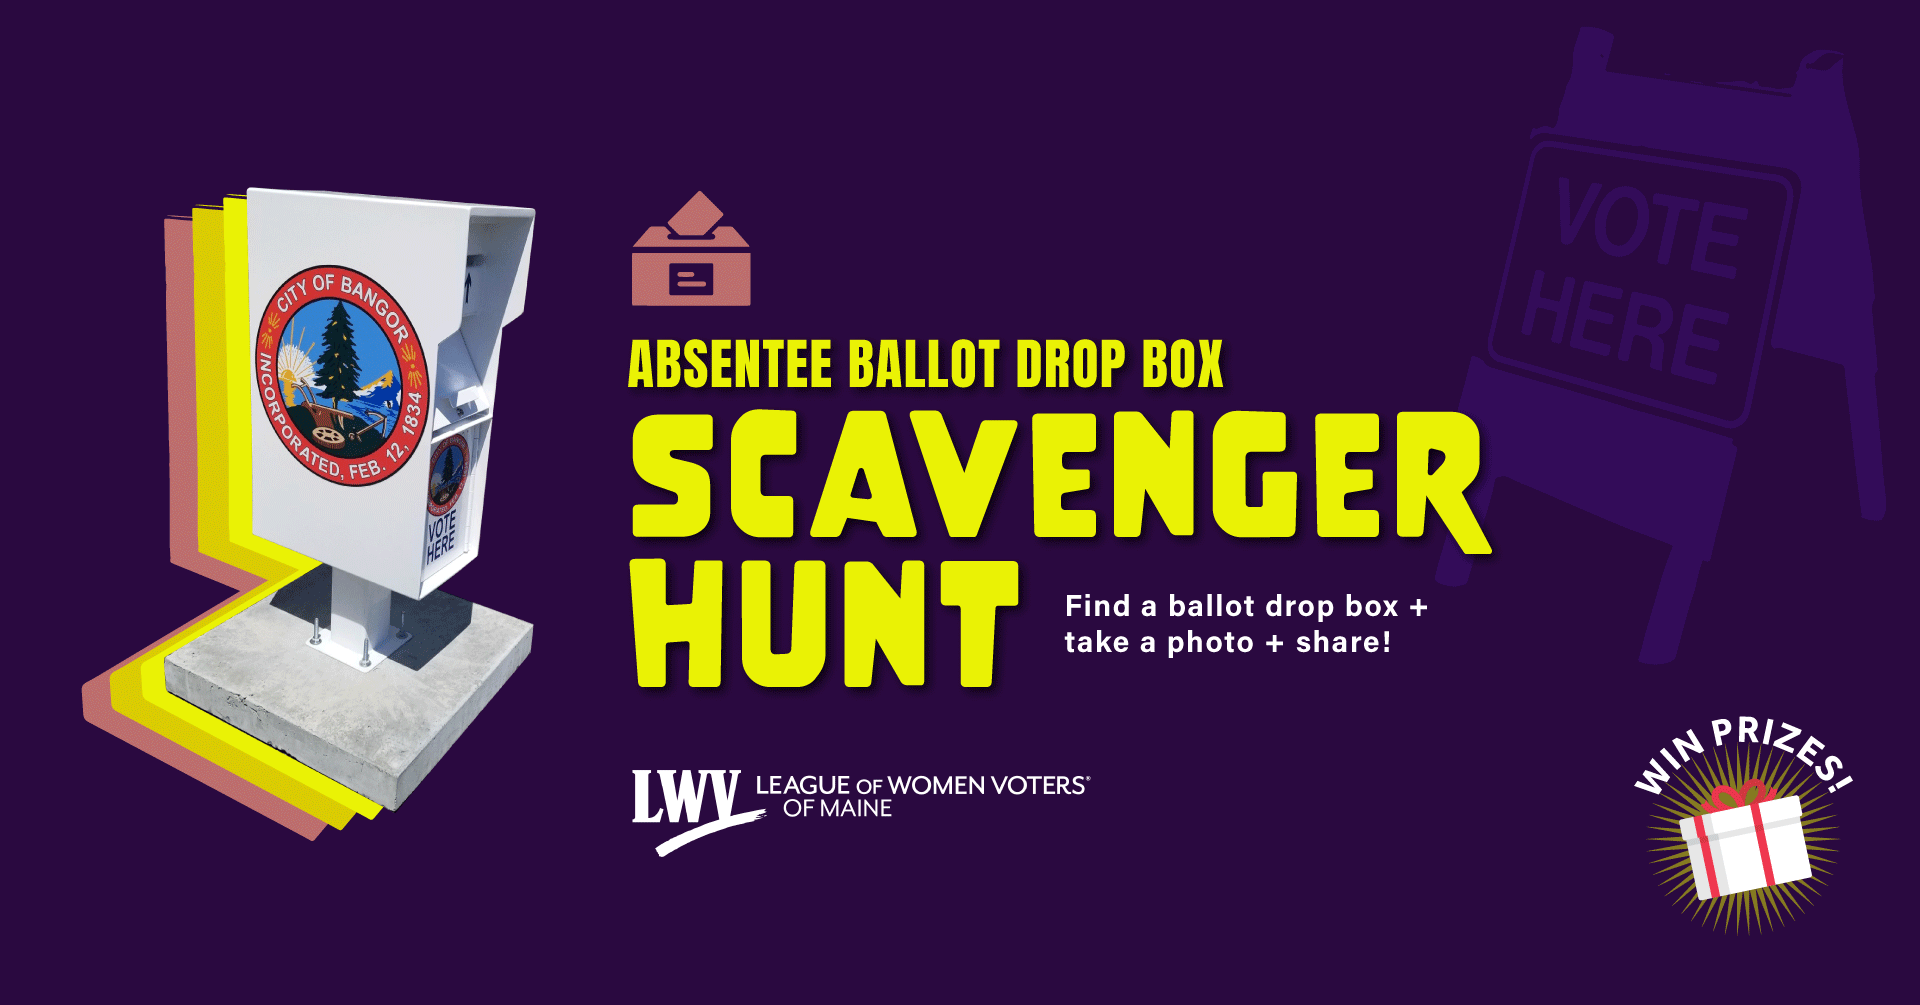 Most of Maine’s municipalities have opted into the absentee ballot drop box system, but the quality of those boxes can vary widely. Adding or improving a ballot drop box is an easy way for towns and cities to support absentee voters. We want to improve Maine’s drop boxes, and we would love your help! Click here to learn more